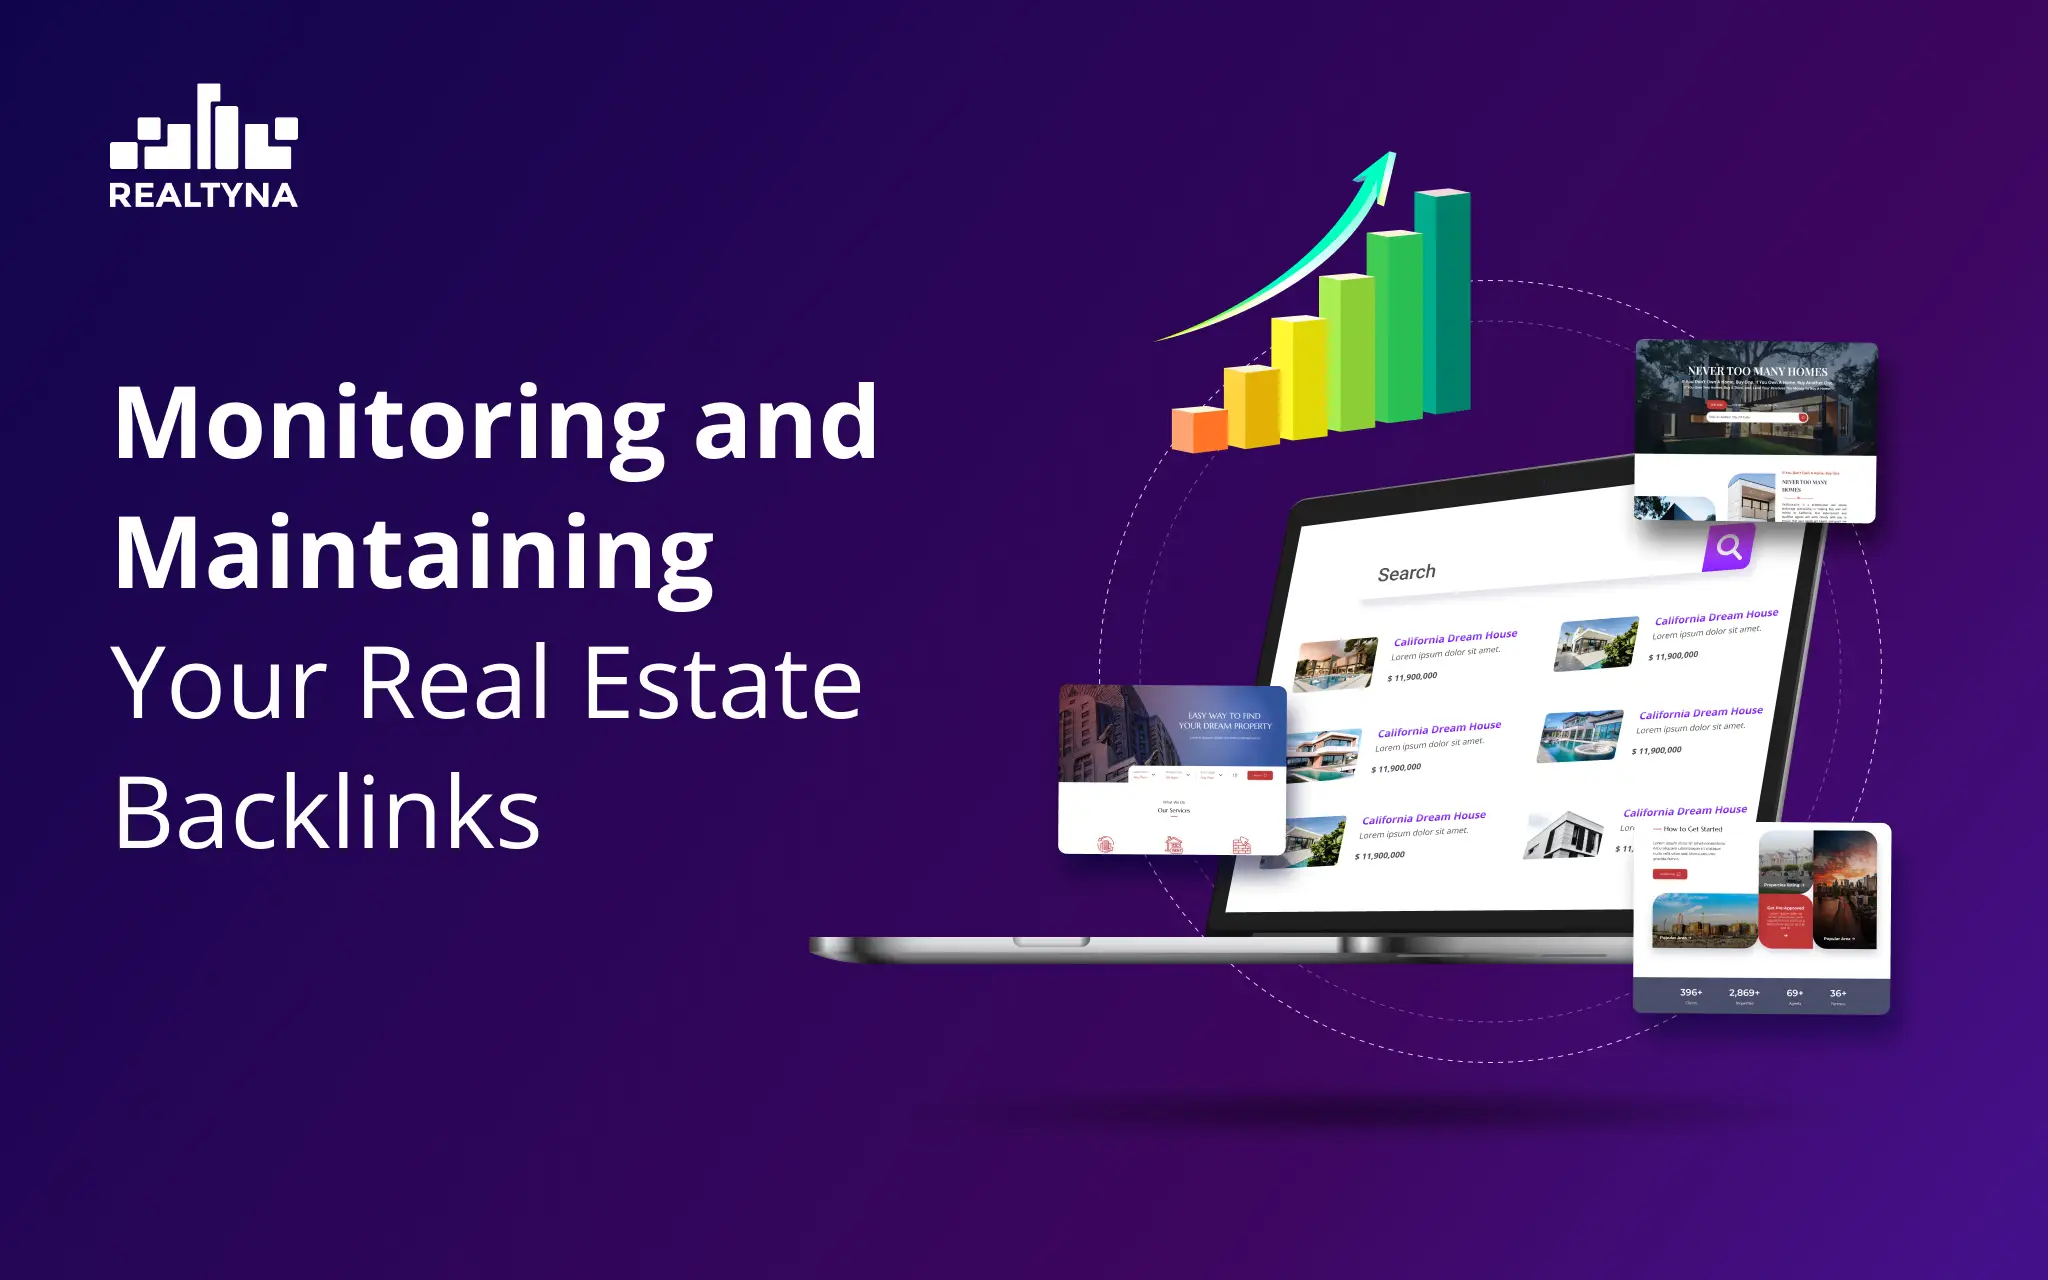 Monitoring and Maintaining Your Real Estate Backlinks